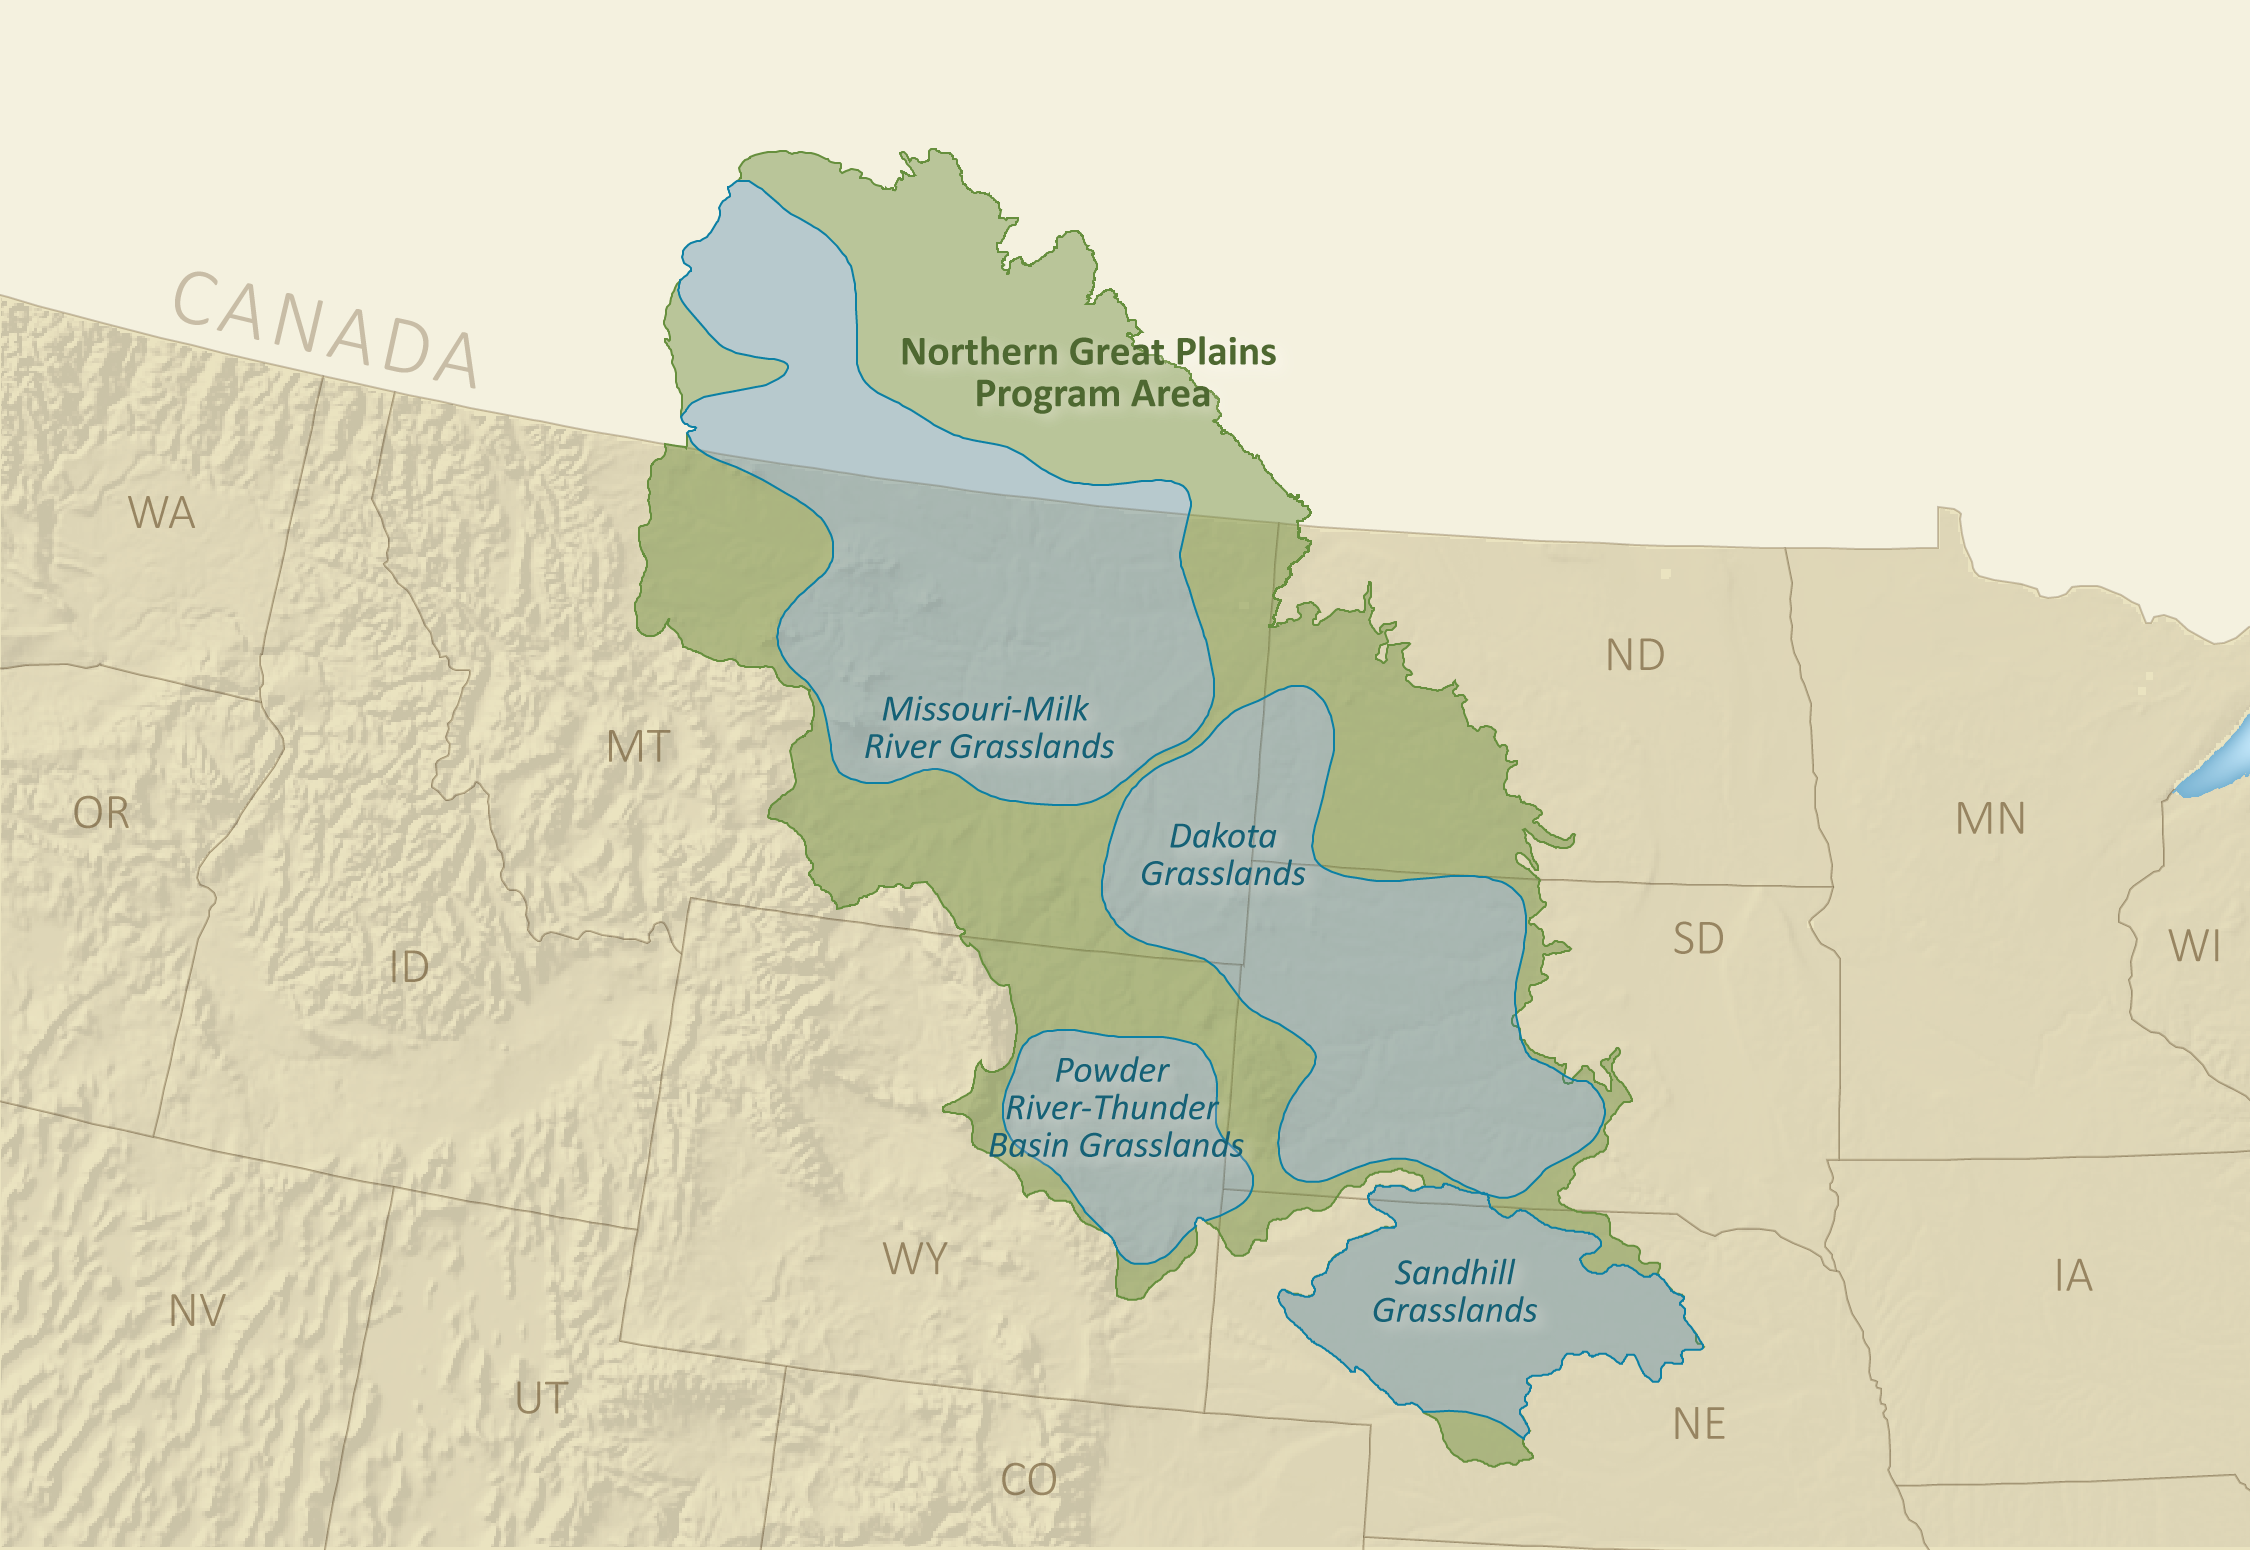 Northern Great Plains 2023 Request for Proposals